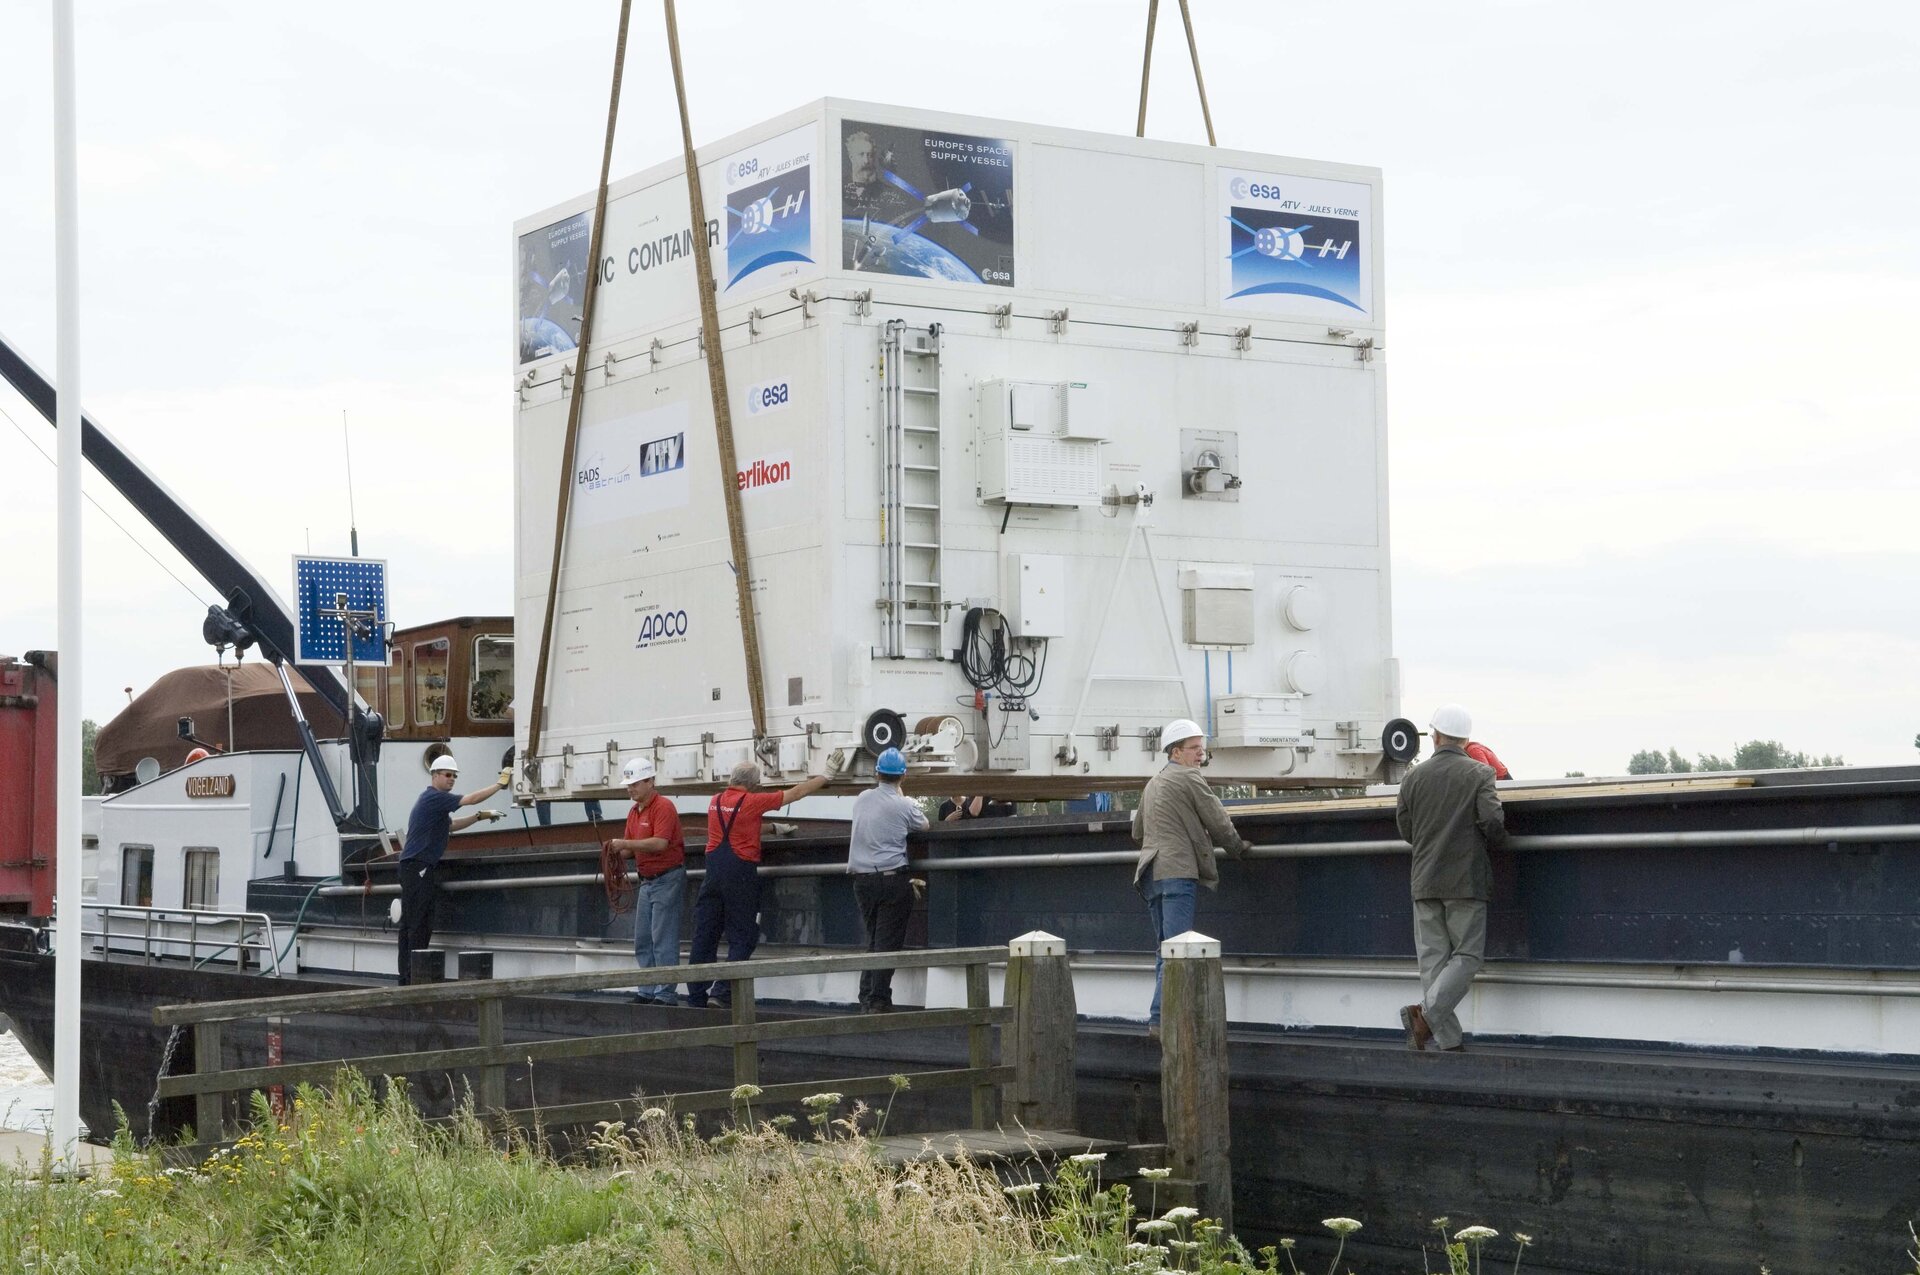 After arriving at Katwijk harbour, the spacecraft sections are loaded onto two canal barges